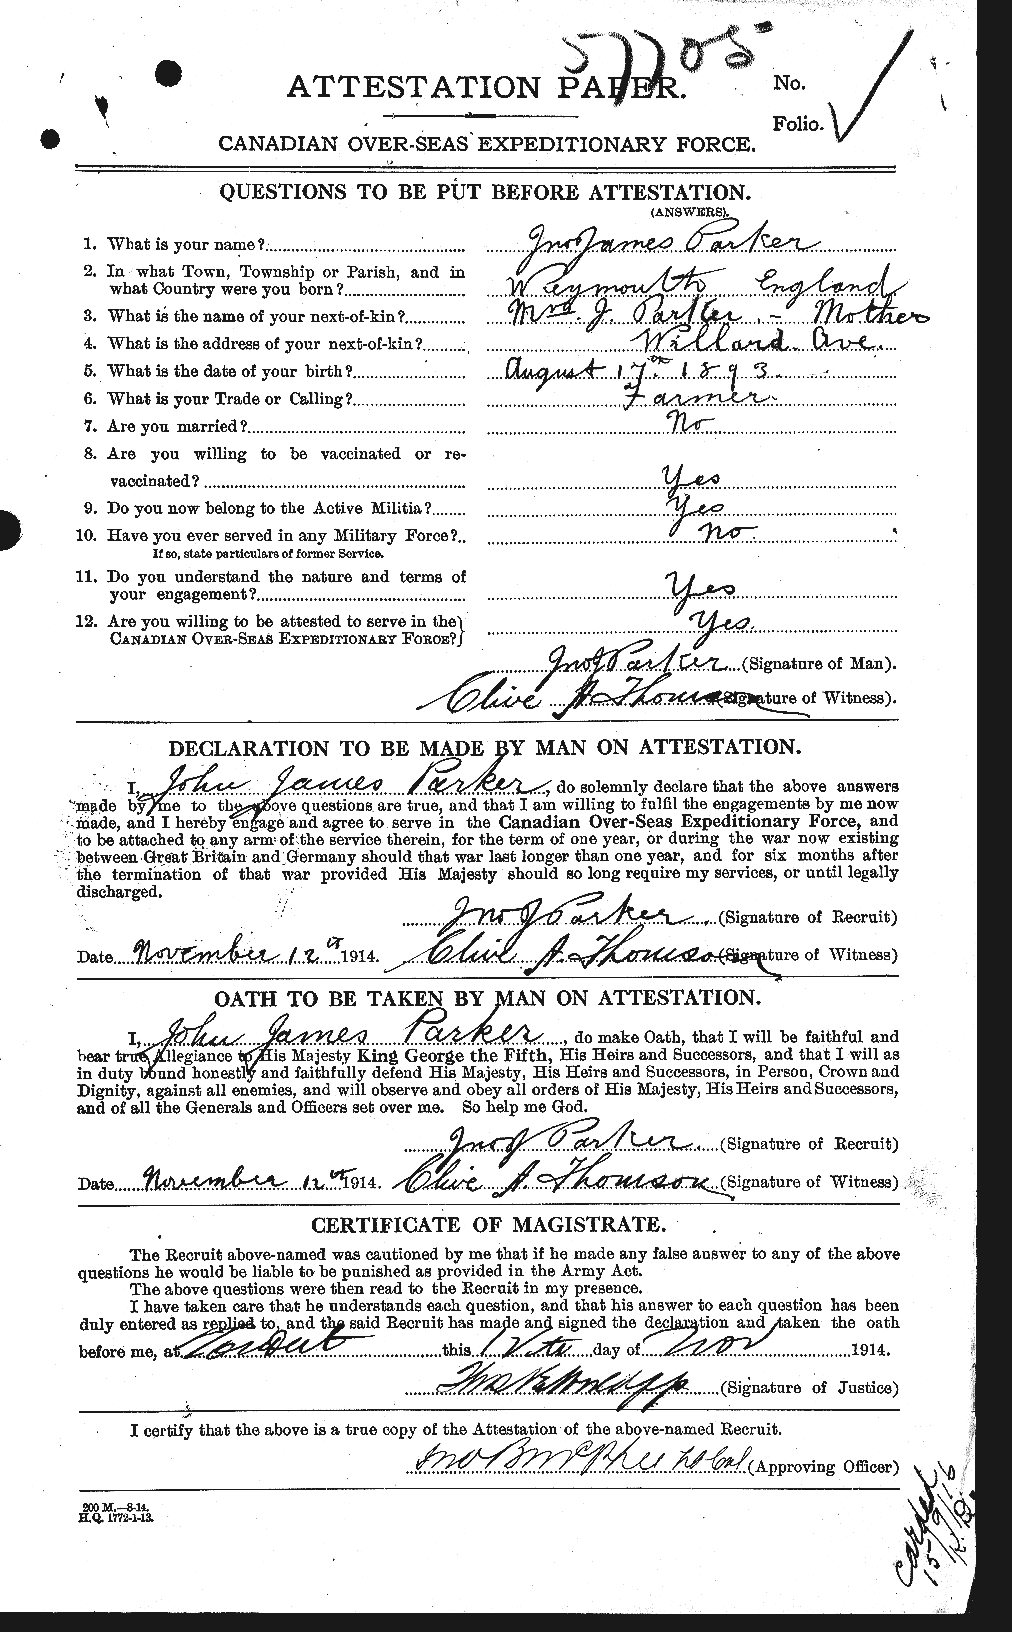 Personnel Records of the First World War - CEF 565478a